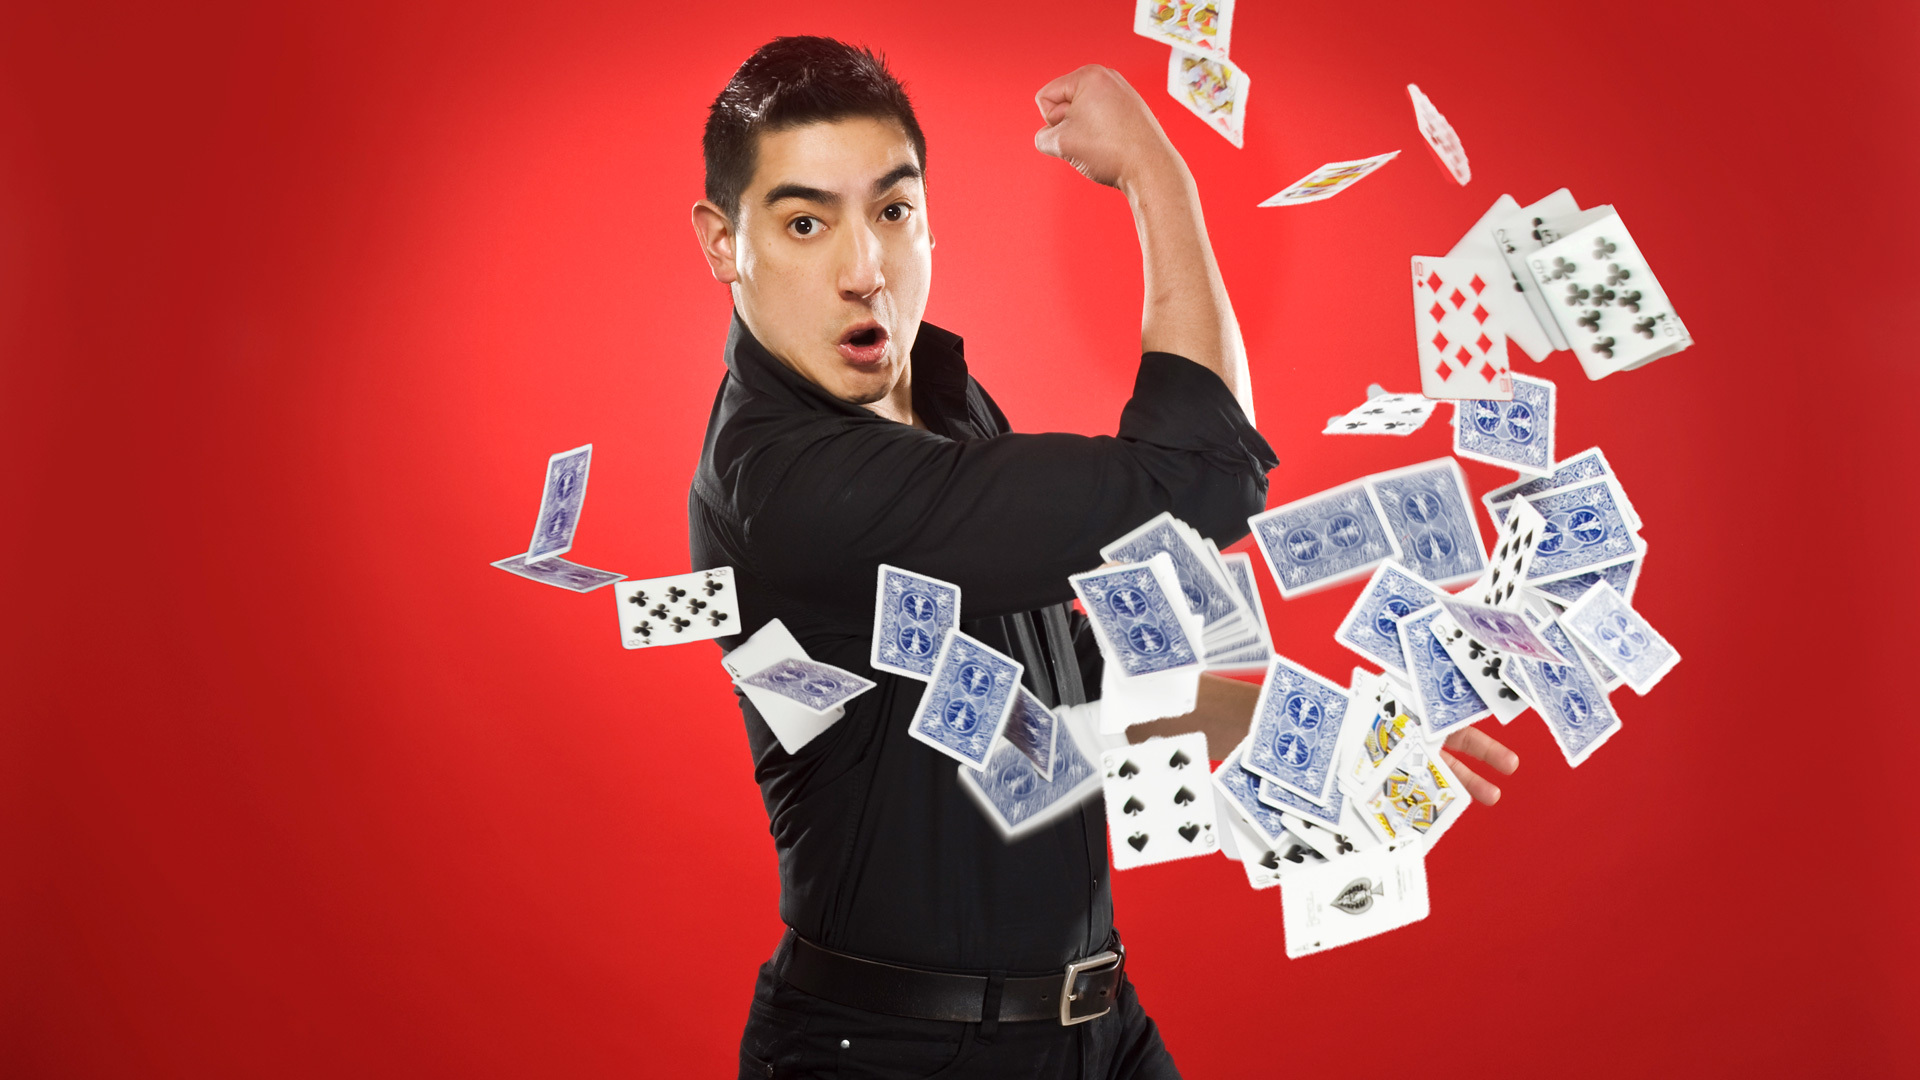 A man wearing a black shirt throws playing cards in a flourish against a red background.